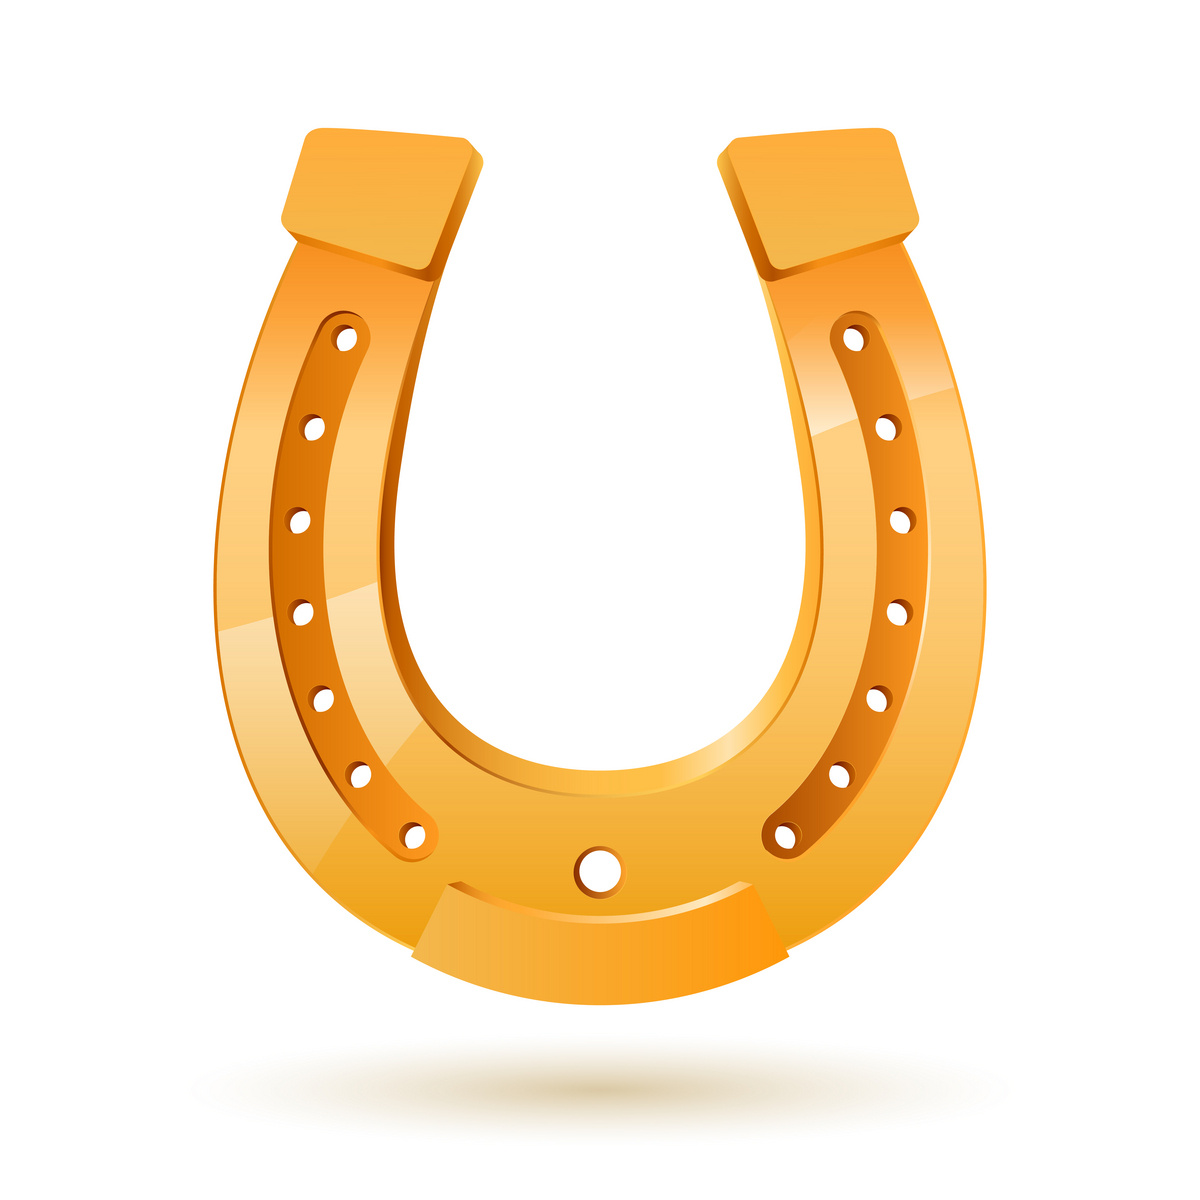 Horseshoe Template - Clipart library